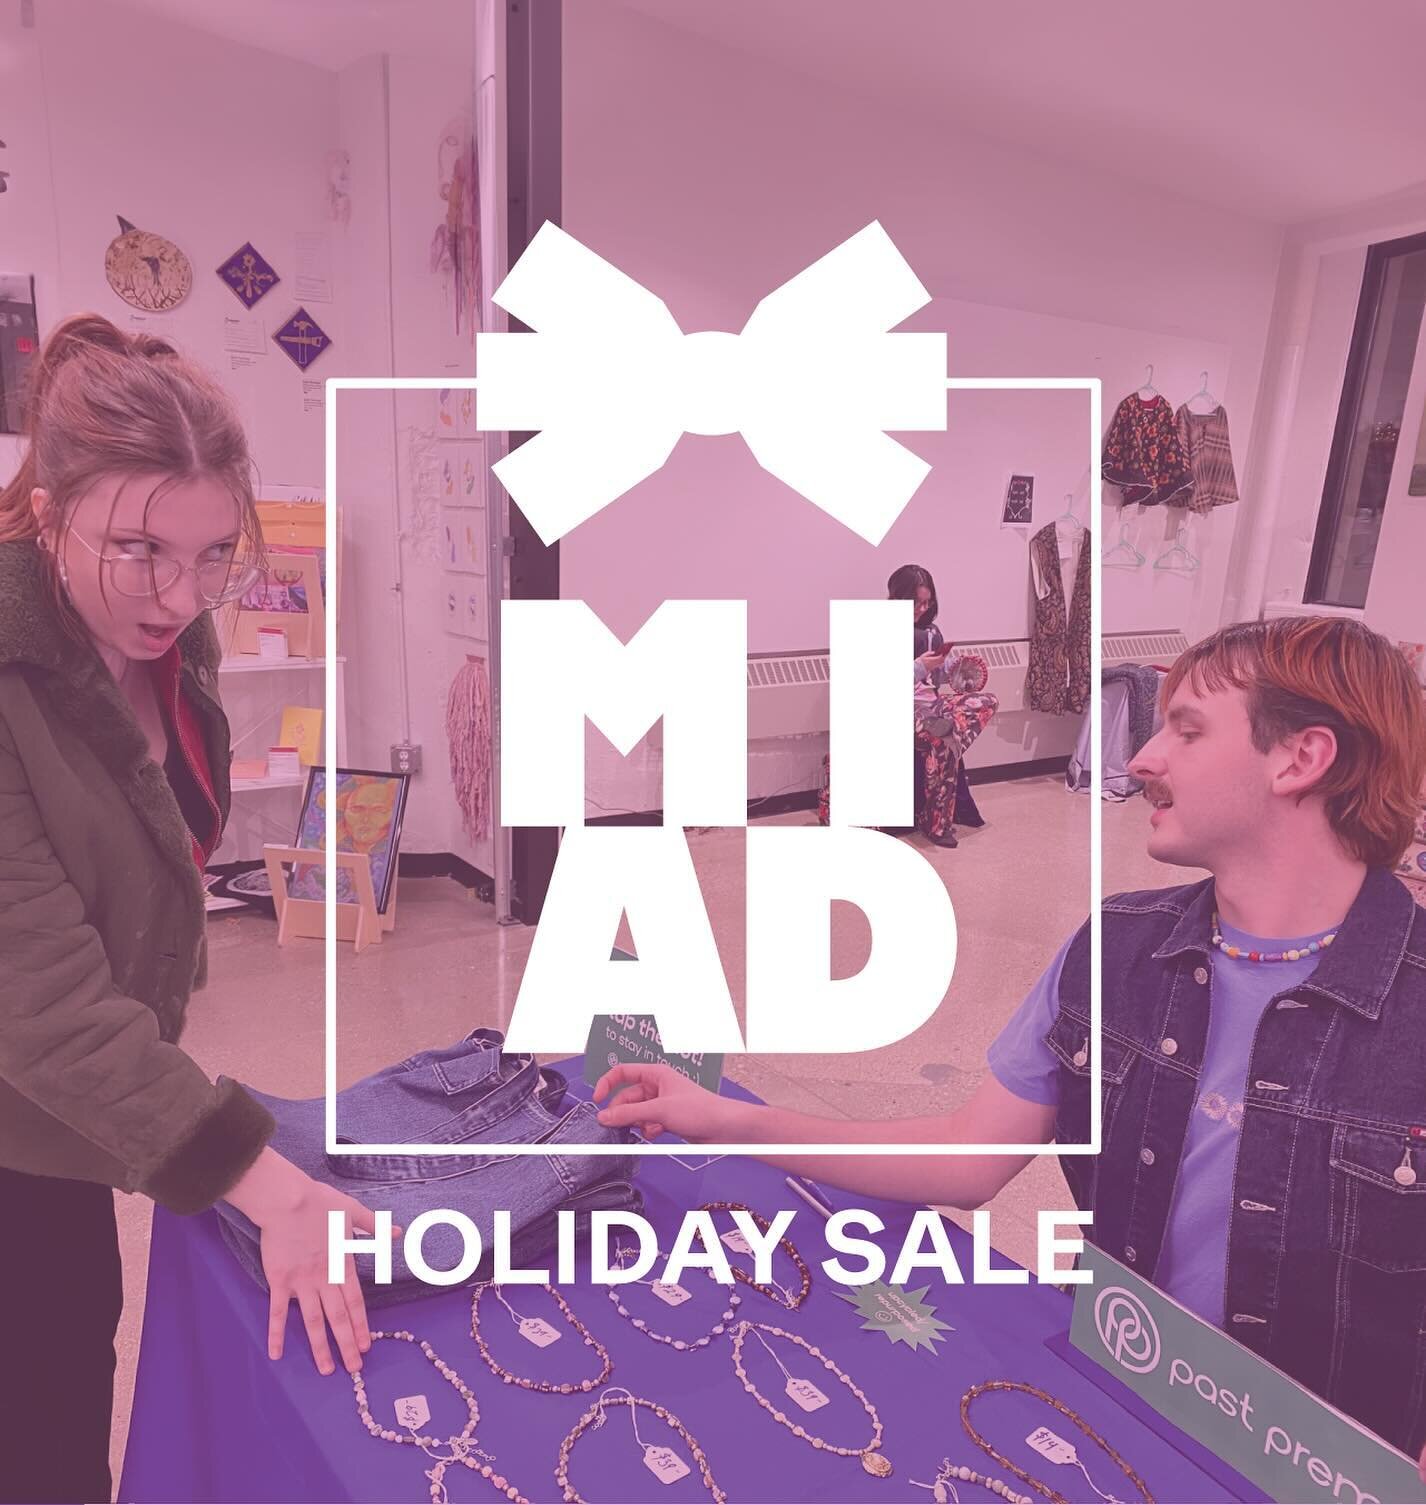 Past Premise returns to the MIAD Holiday Sale, November 30th - December 2nd! 

273 E. Erie St., Milwaukee, WI
Buy tickets or learn more: www.miad.edu/holidaysale

@miadcollege 
#MIAD #MIADholiday #shoplocal #shopsmall #supportlocalmke #holidaysale #h